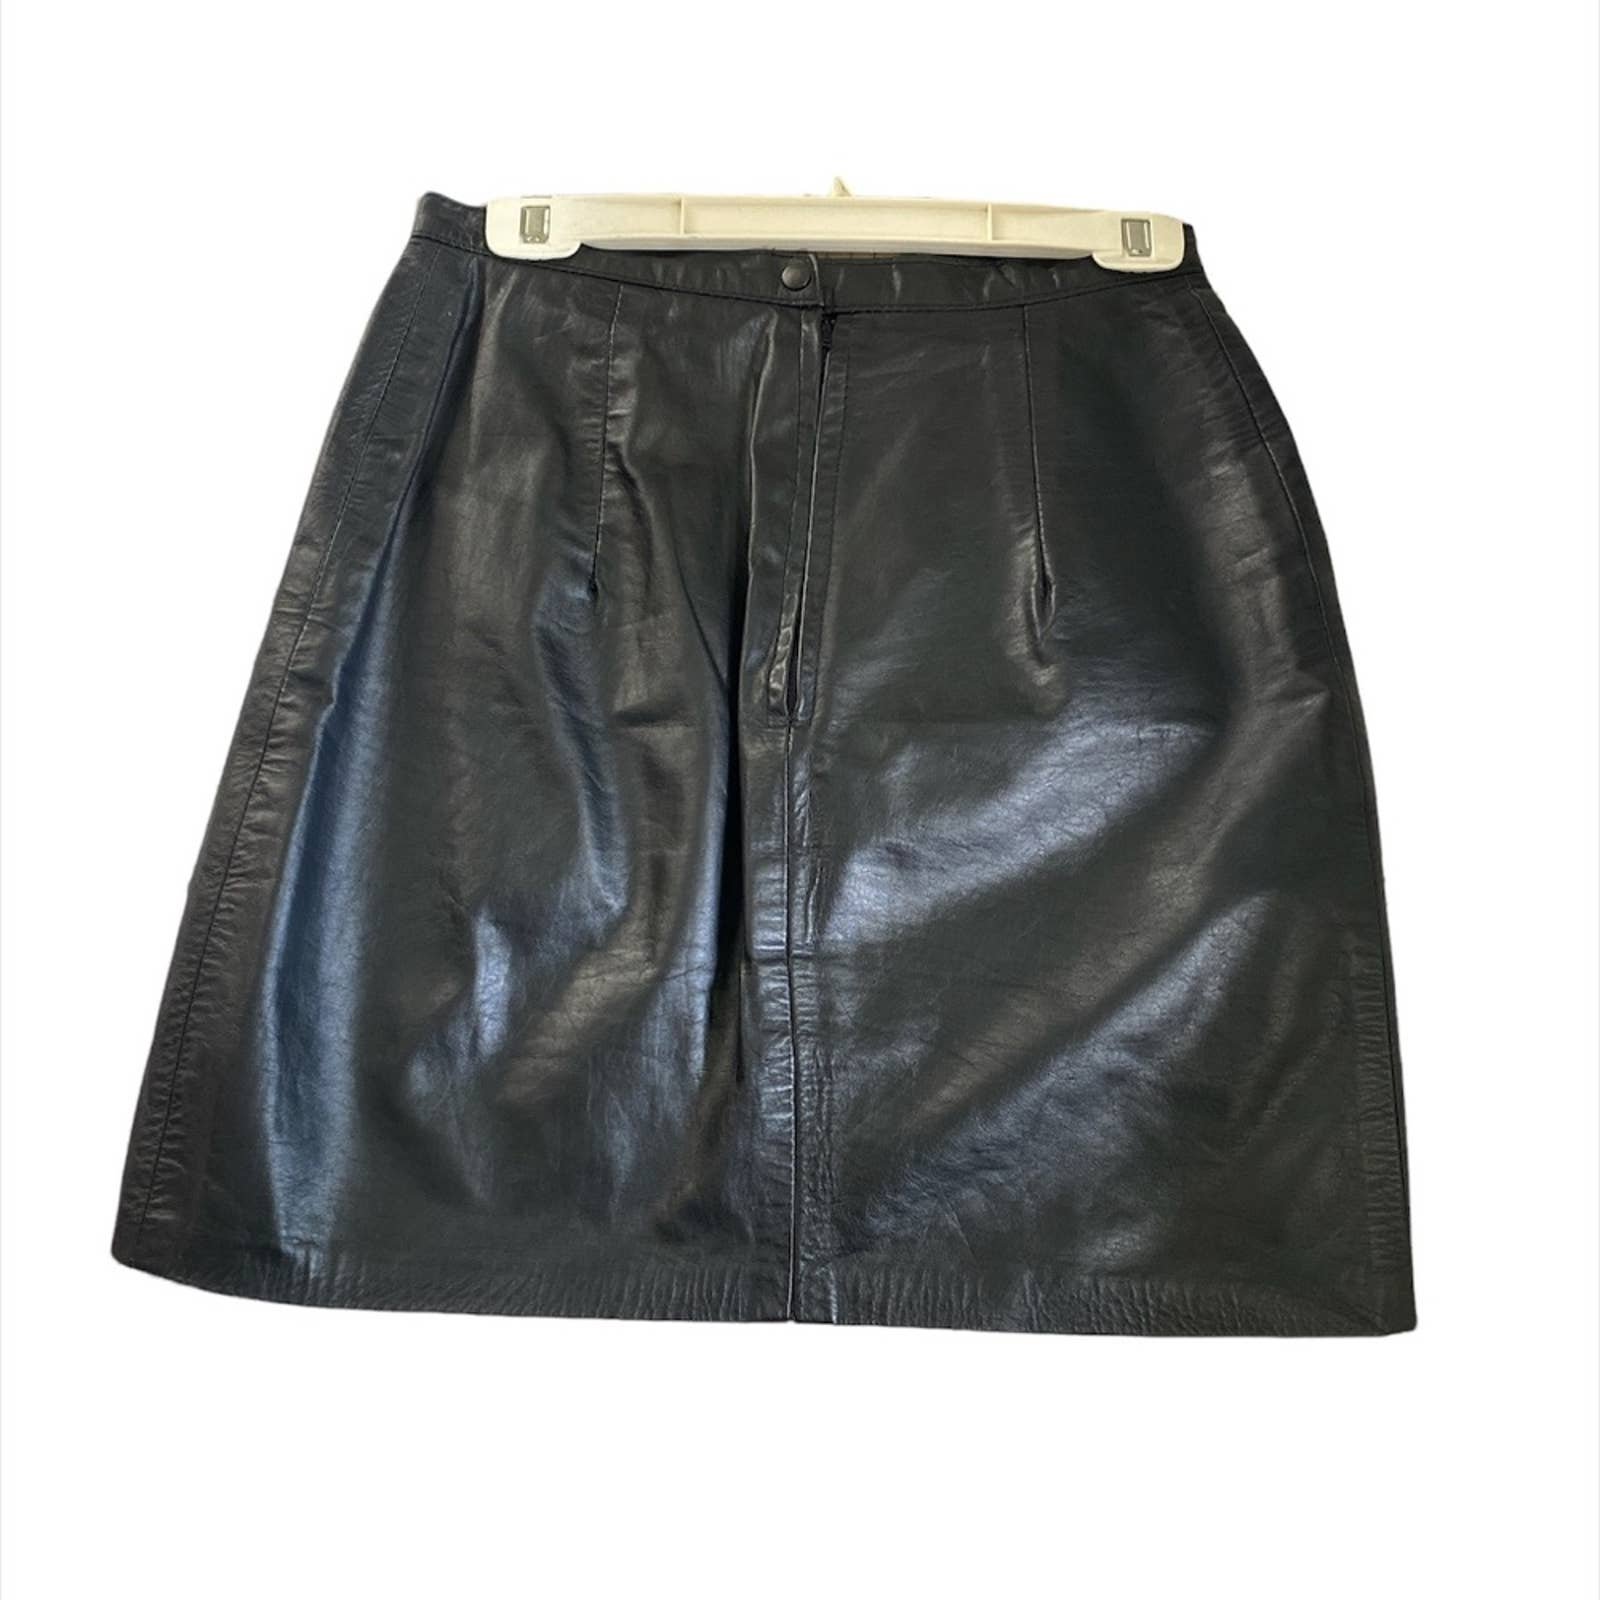 Affordable EUC!! Vintage Leather Skirt (Ladies) by Oute